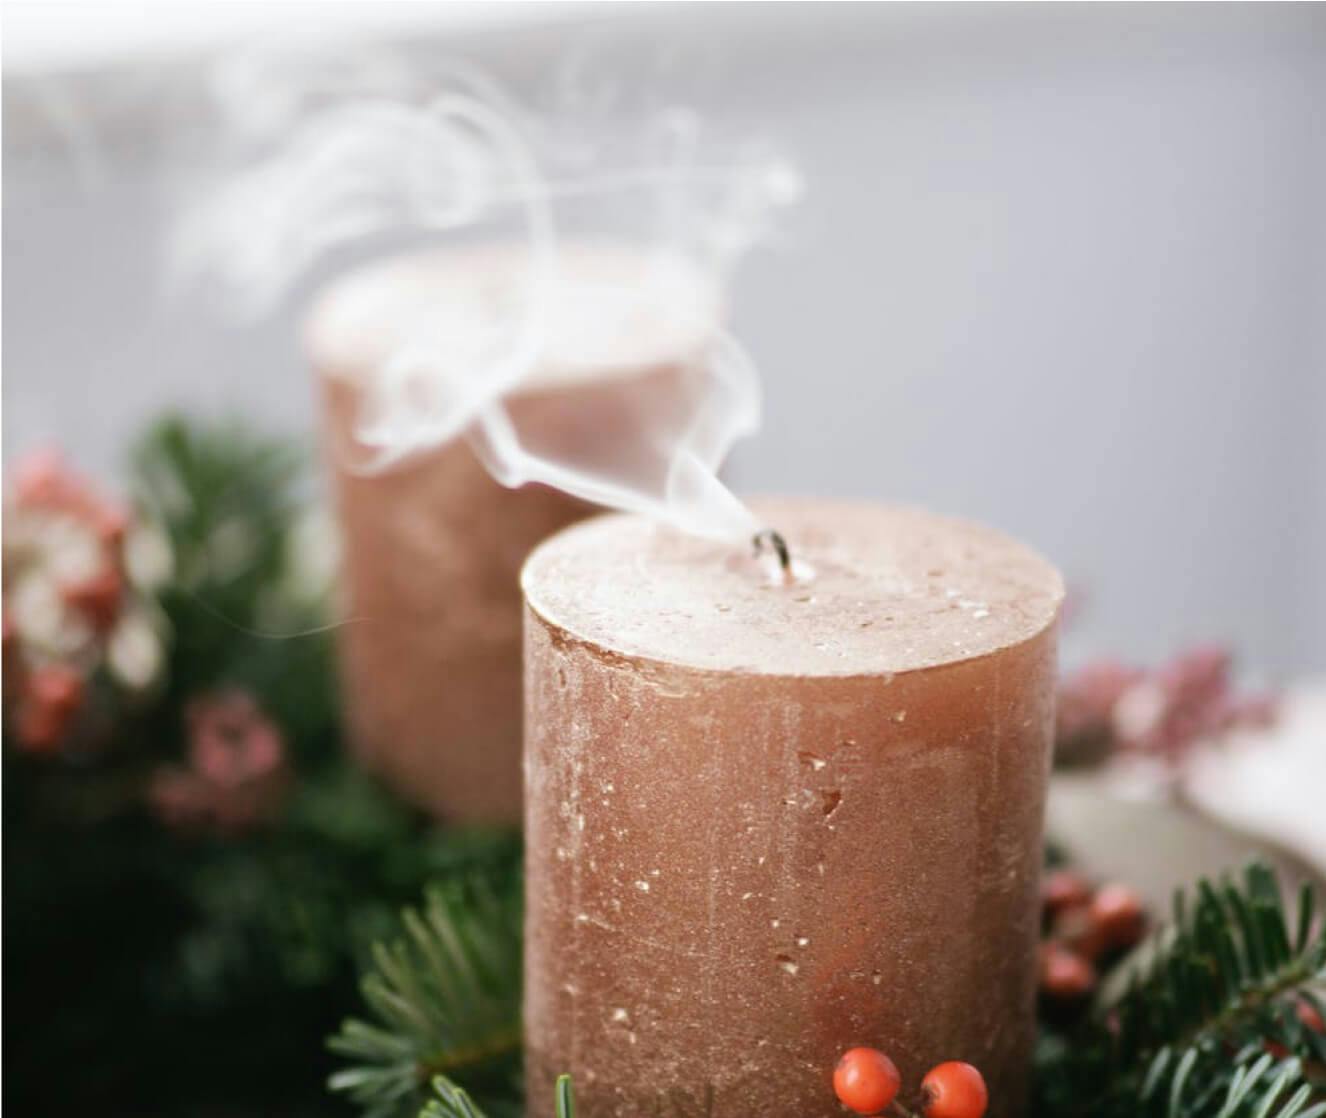 Candles release pollutants